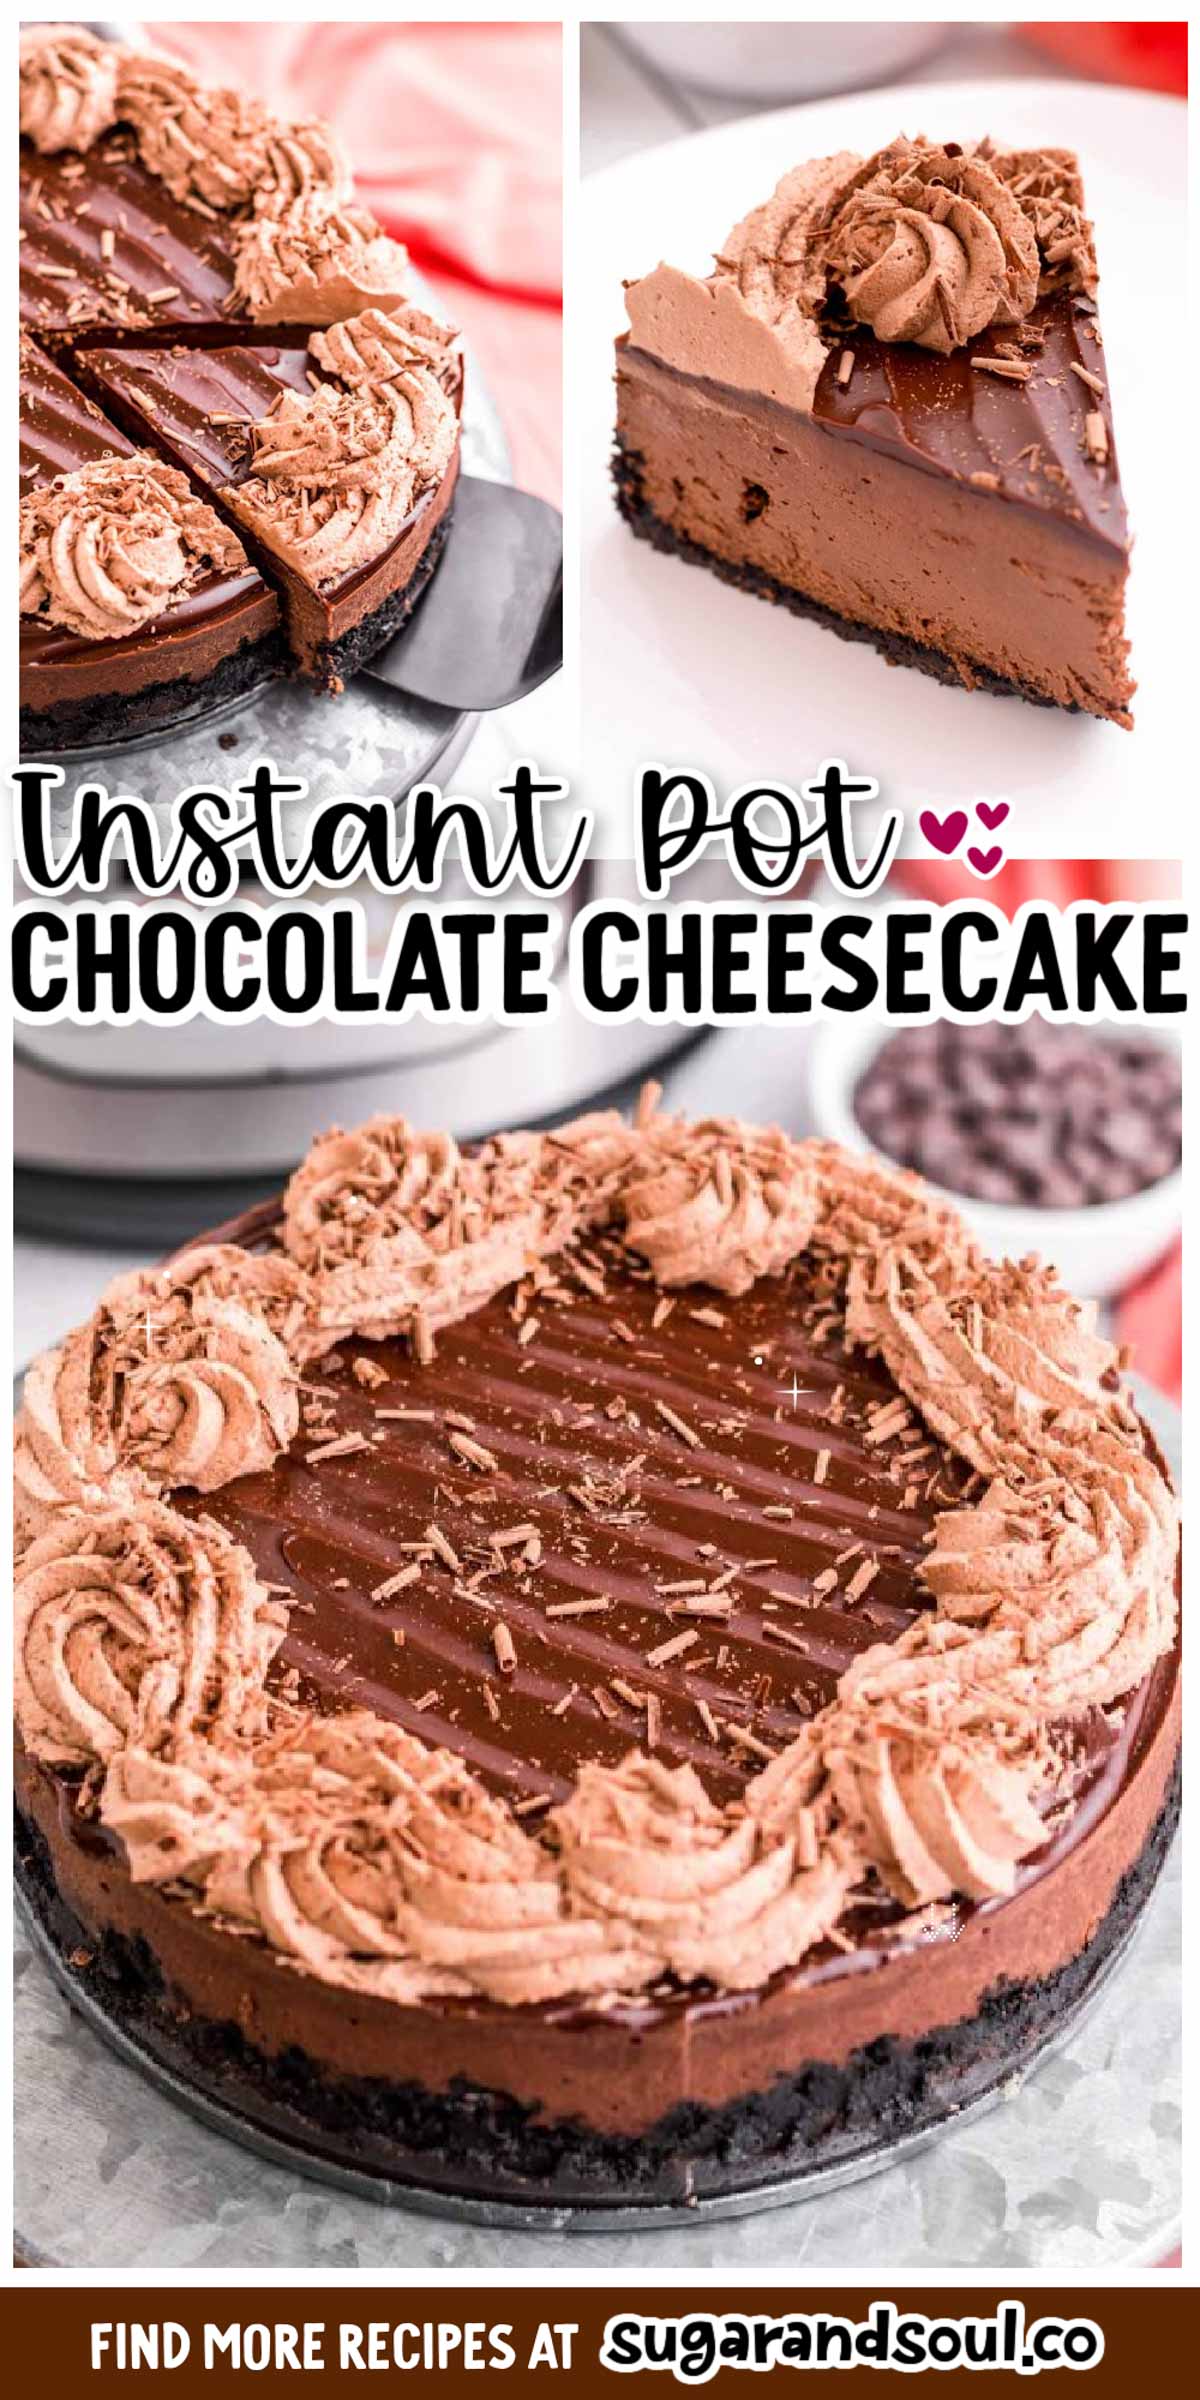 If you love chocolate then this Instant Pot Chocolate Cheesecake is just what you’re looking for! With multiple layers of chocolate, this cheesecake is deliciously smooth with a tasty ganache topping and swirls of chocolate whipped cream. The perfect dessert for any chocolate lover. via @sugarandsoulco